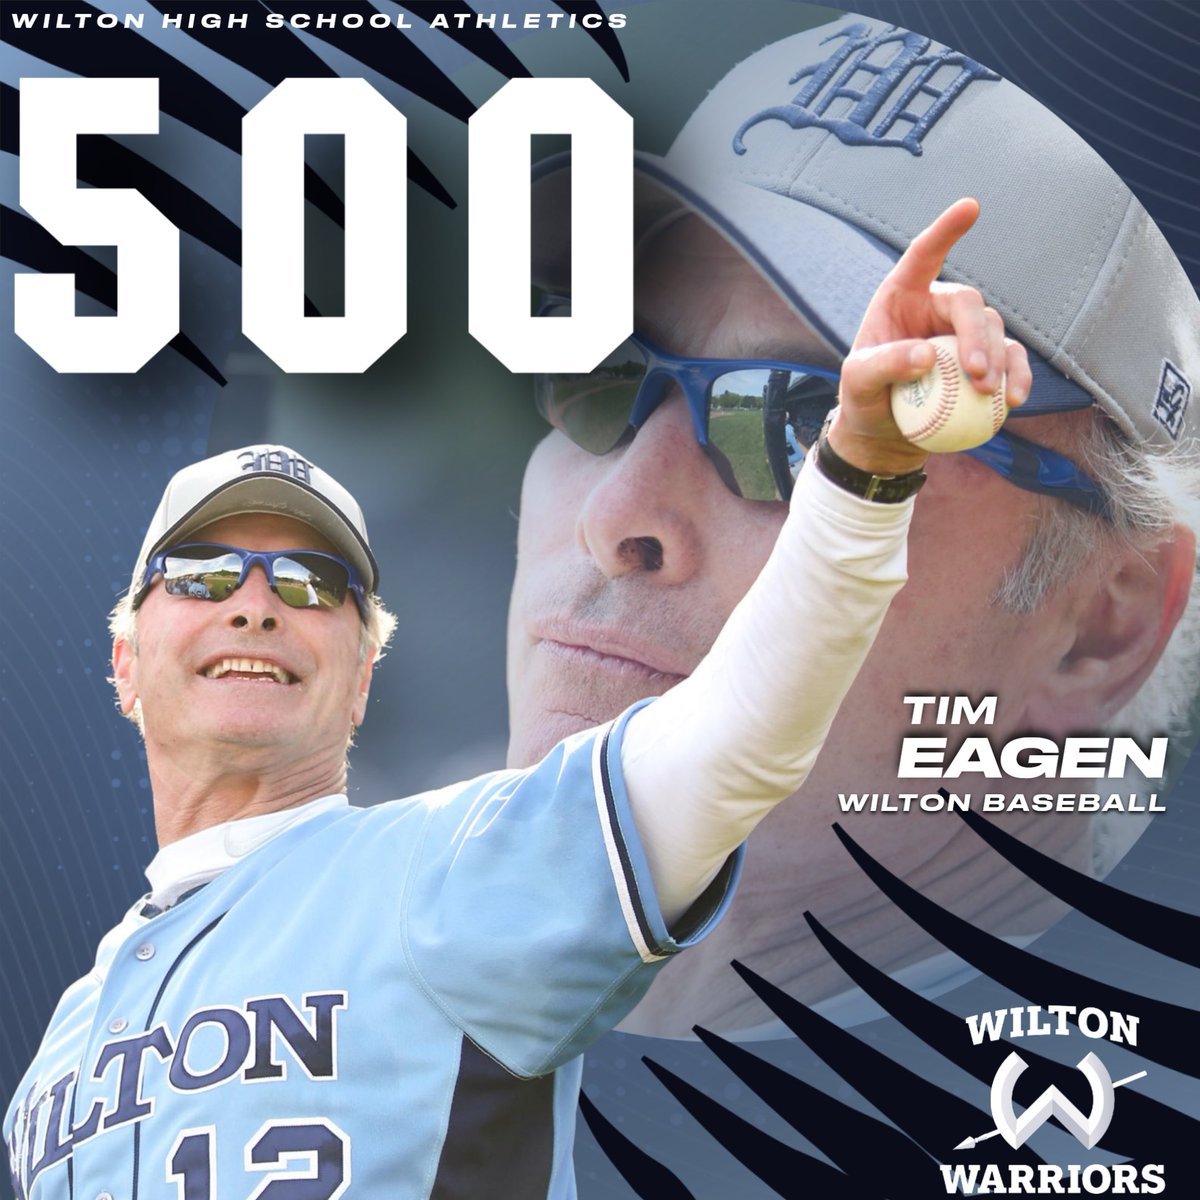 Tim Eagen took over the Wilton baseball program in 1980 and last week in a game vs the New Canaan Rams, Coach Eagen notched his 500th win as a head coach for Wilton High School. 

Coach Eagen was also the head football coach from 2001-2008 

Congratulations, Tim! #ctbase #ctfb